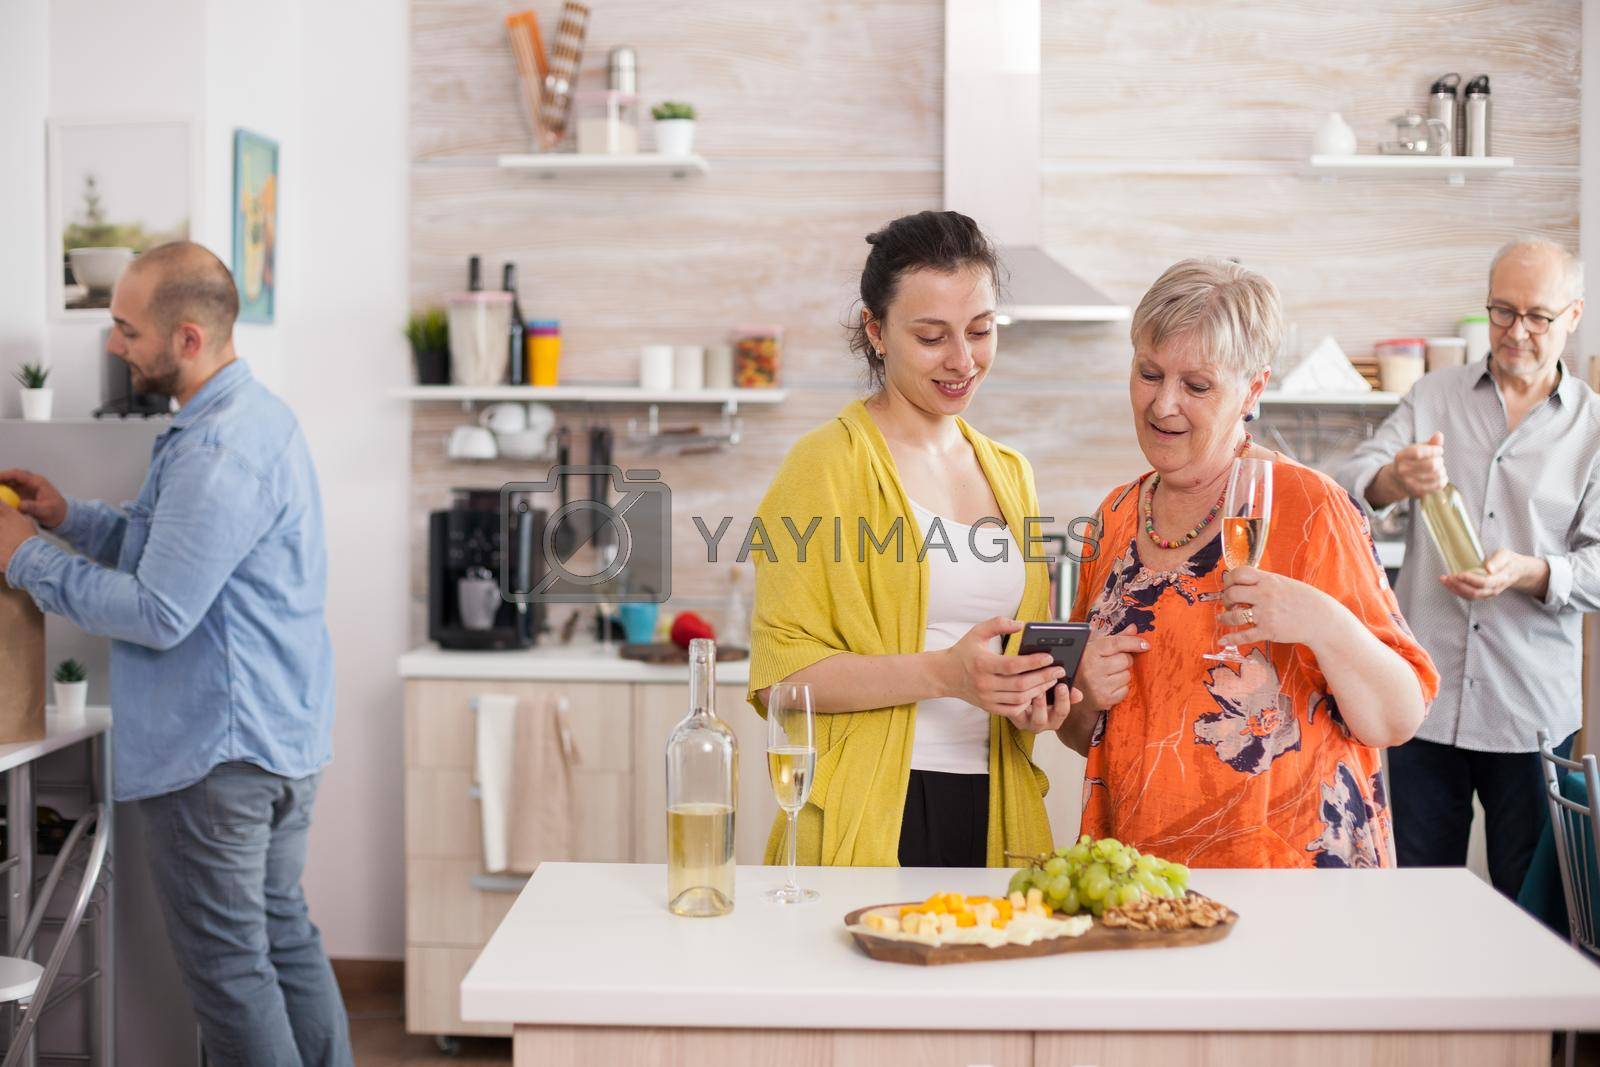 Mother and daughter smiling in kitchen using smarthphone drinking wine.